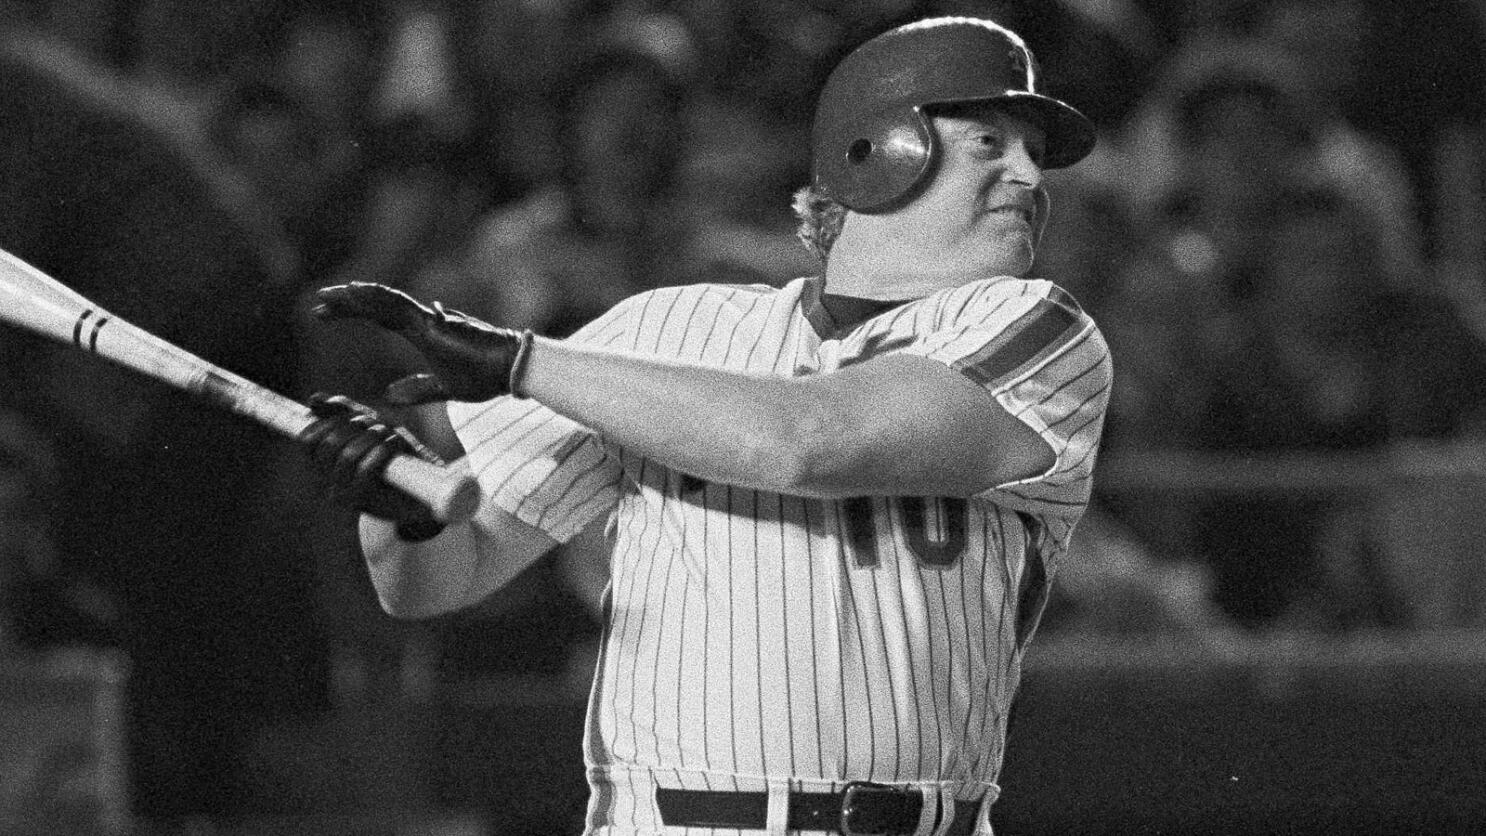 In 1972, the Montreal Expos traded Rusty Staub to the Mets. And